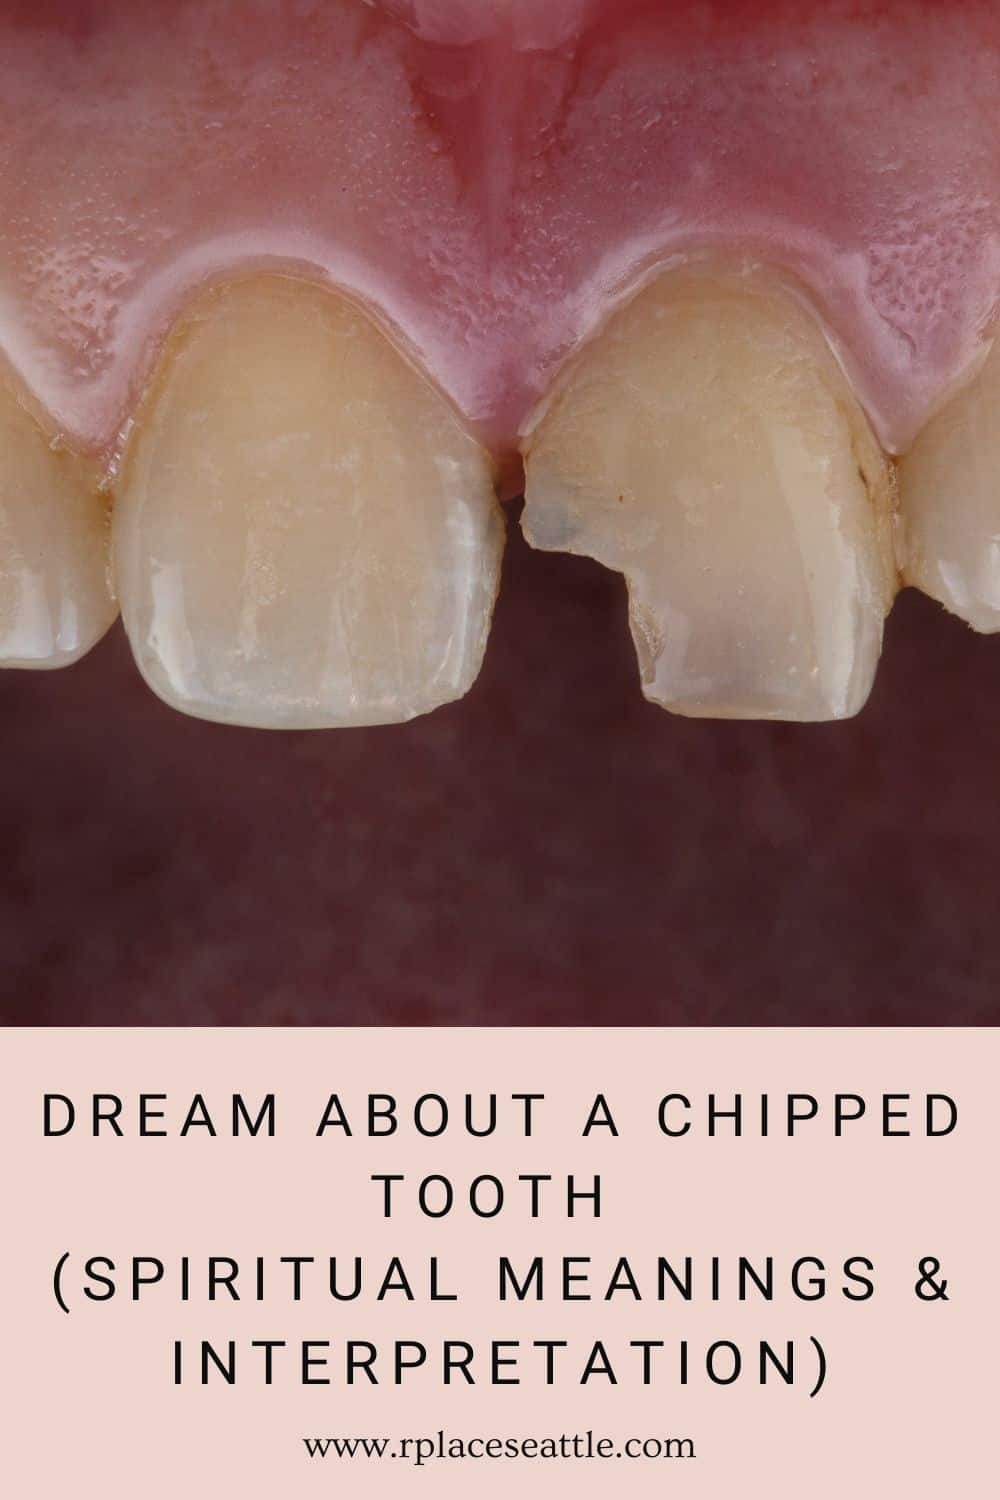 Dream About A Chipped Tooth (Spiritual Meanings & Interpretation)